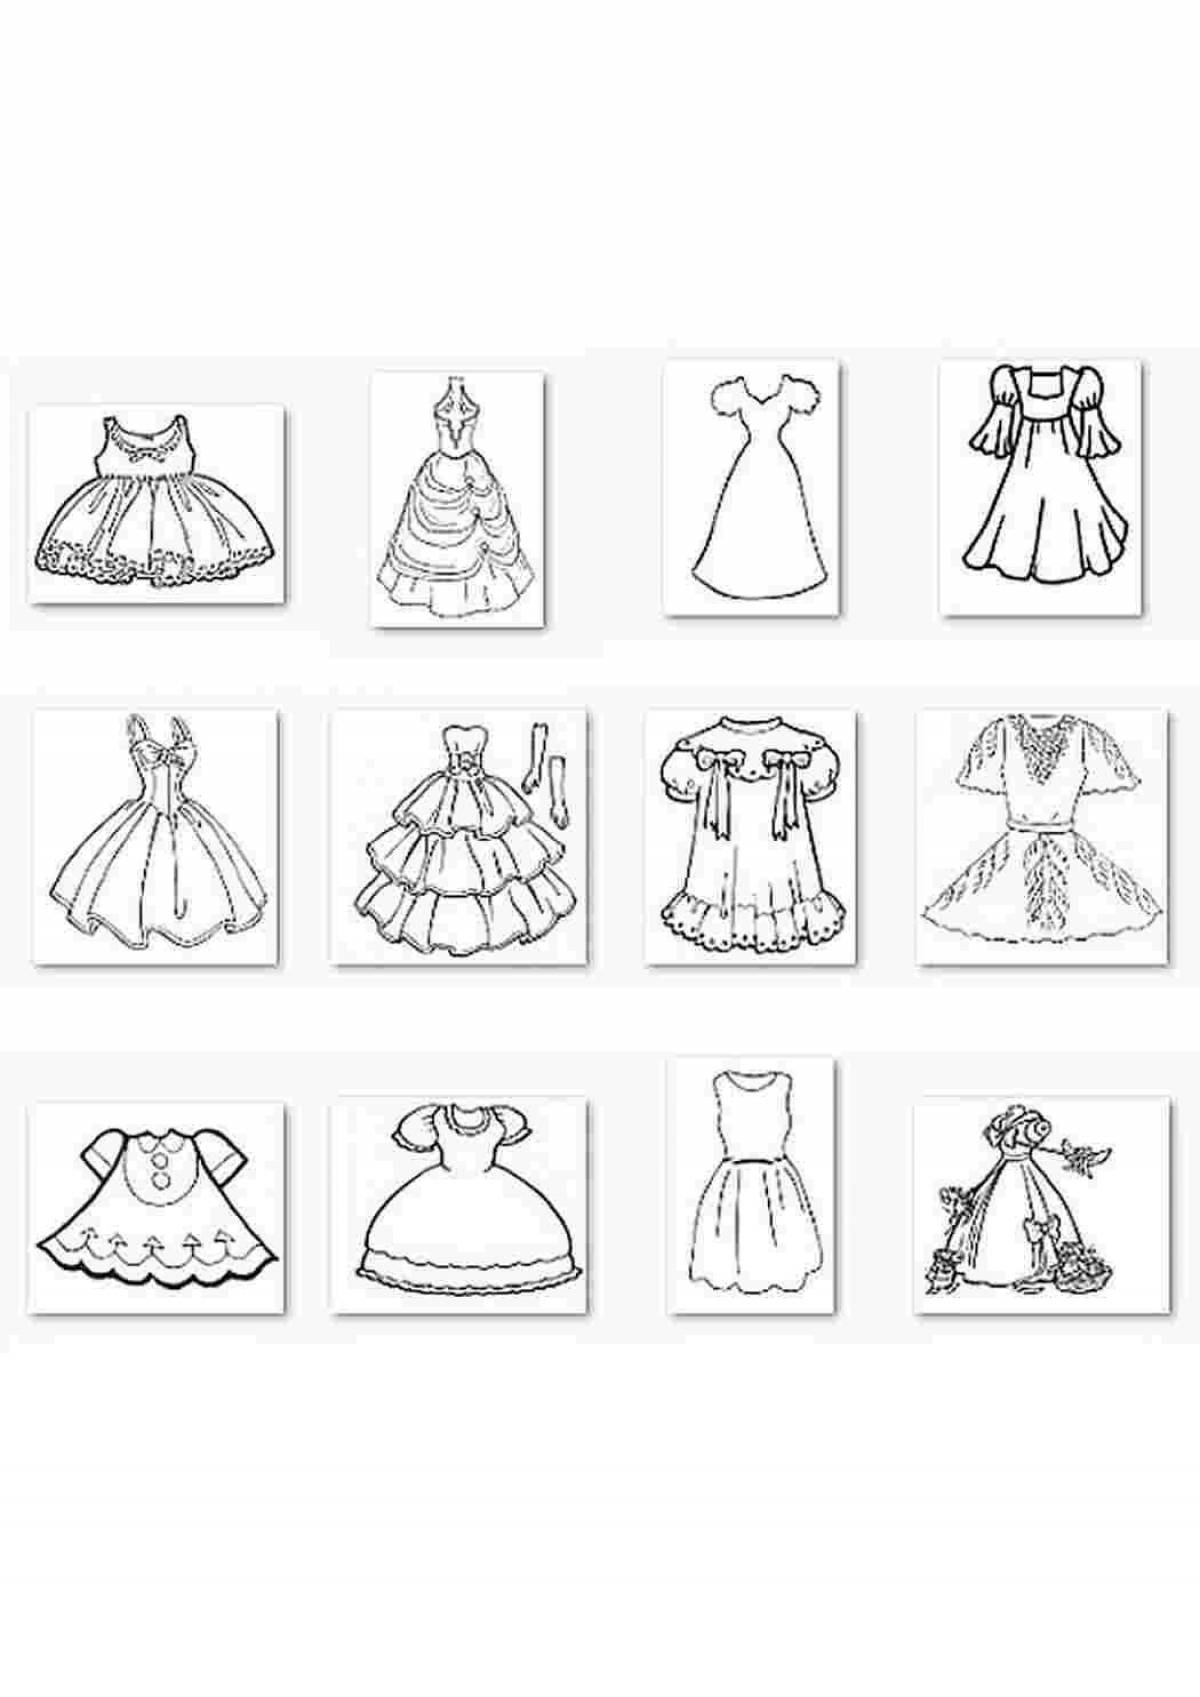 Gorgeous doll dress coloring book for children 4-5 years old